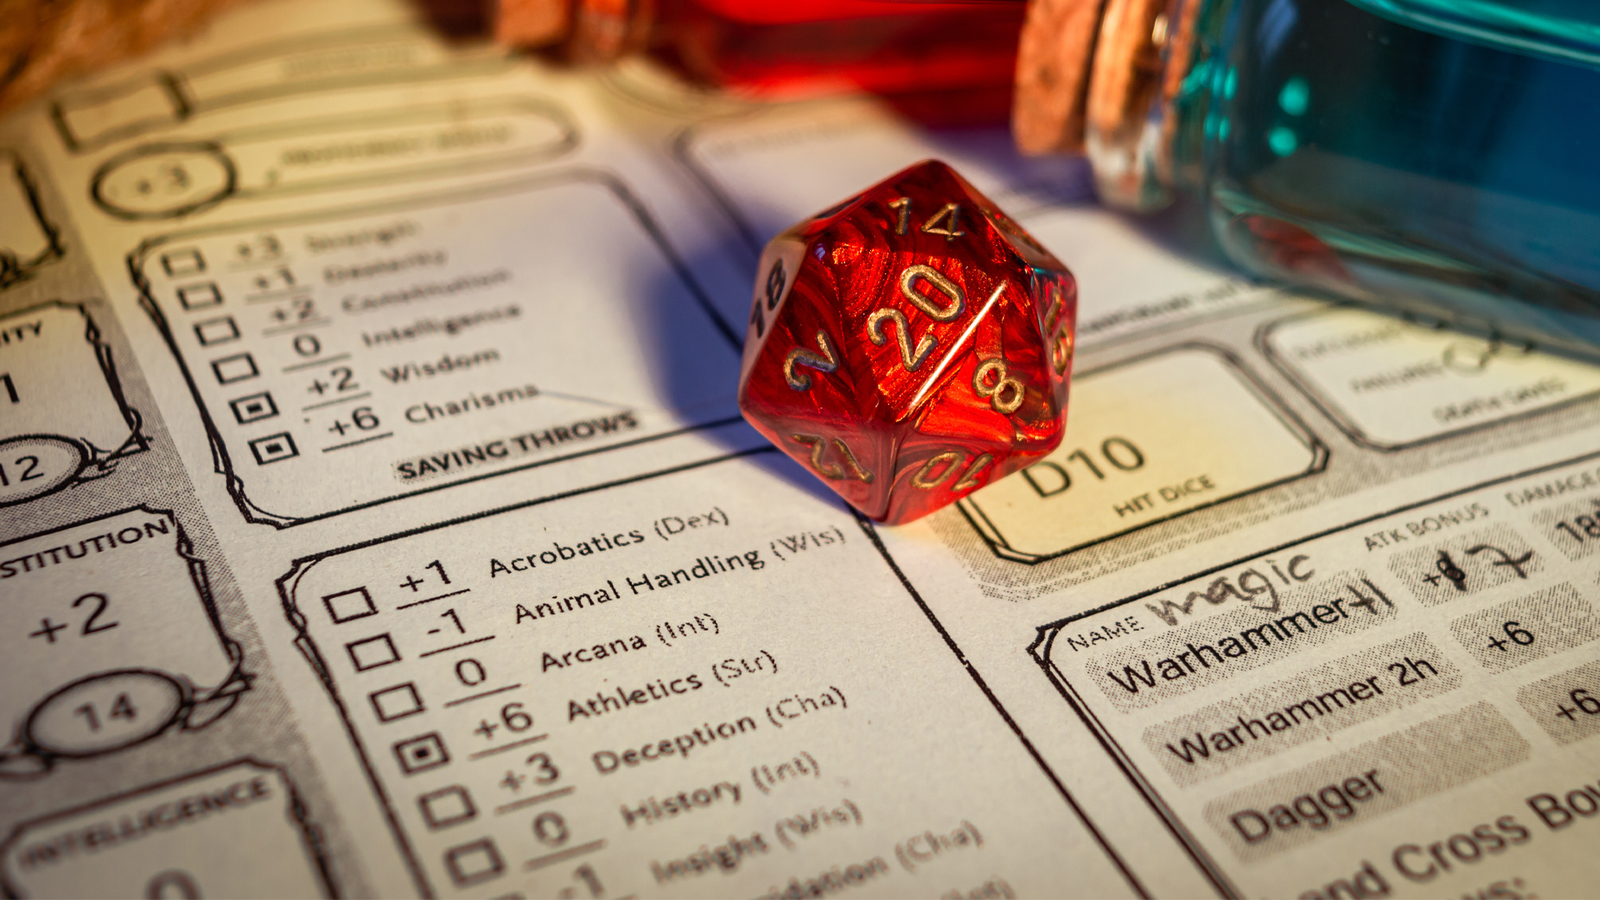 Play Dungeons & Dragons 5e Online  Three Player Custom D&D 5e Campaign -  Choose Your World